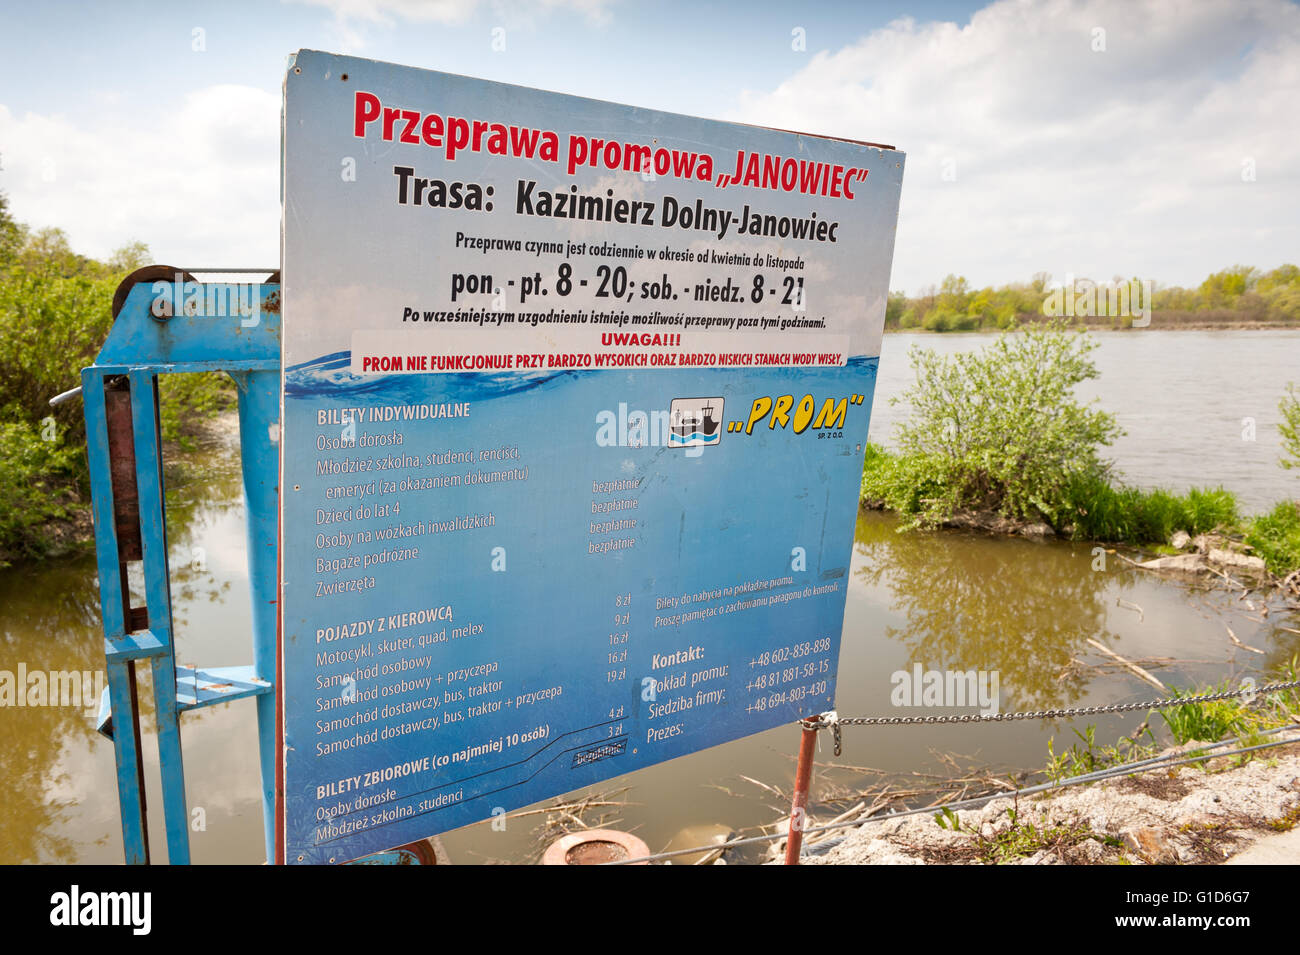 Ferry ship crossing information board with work schedule and prices, course from Kazimierz Dolny to Janowiec in Poland, Europe. Stock Photo